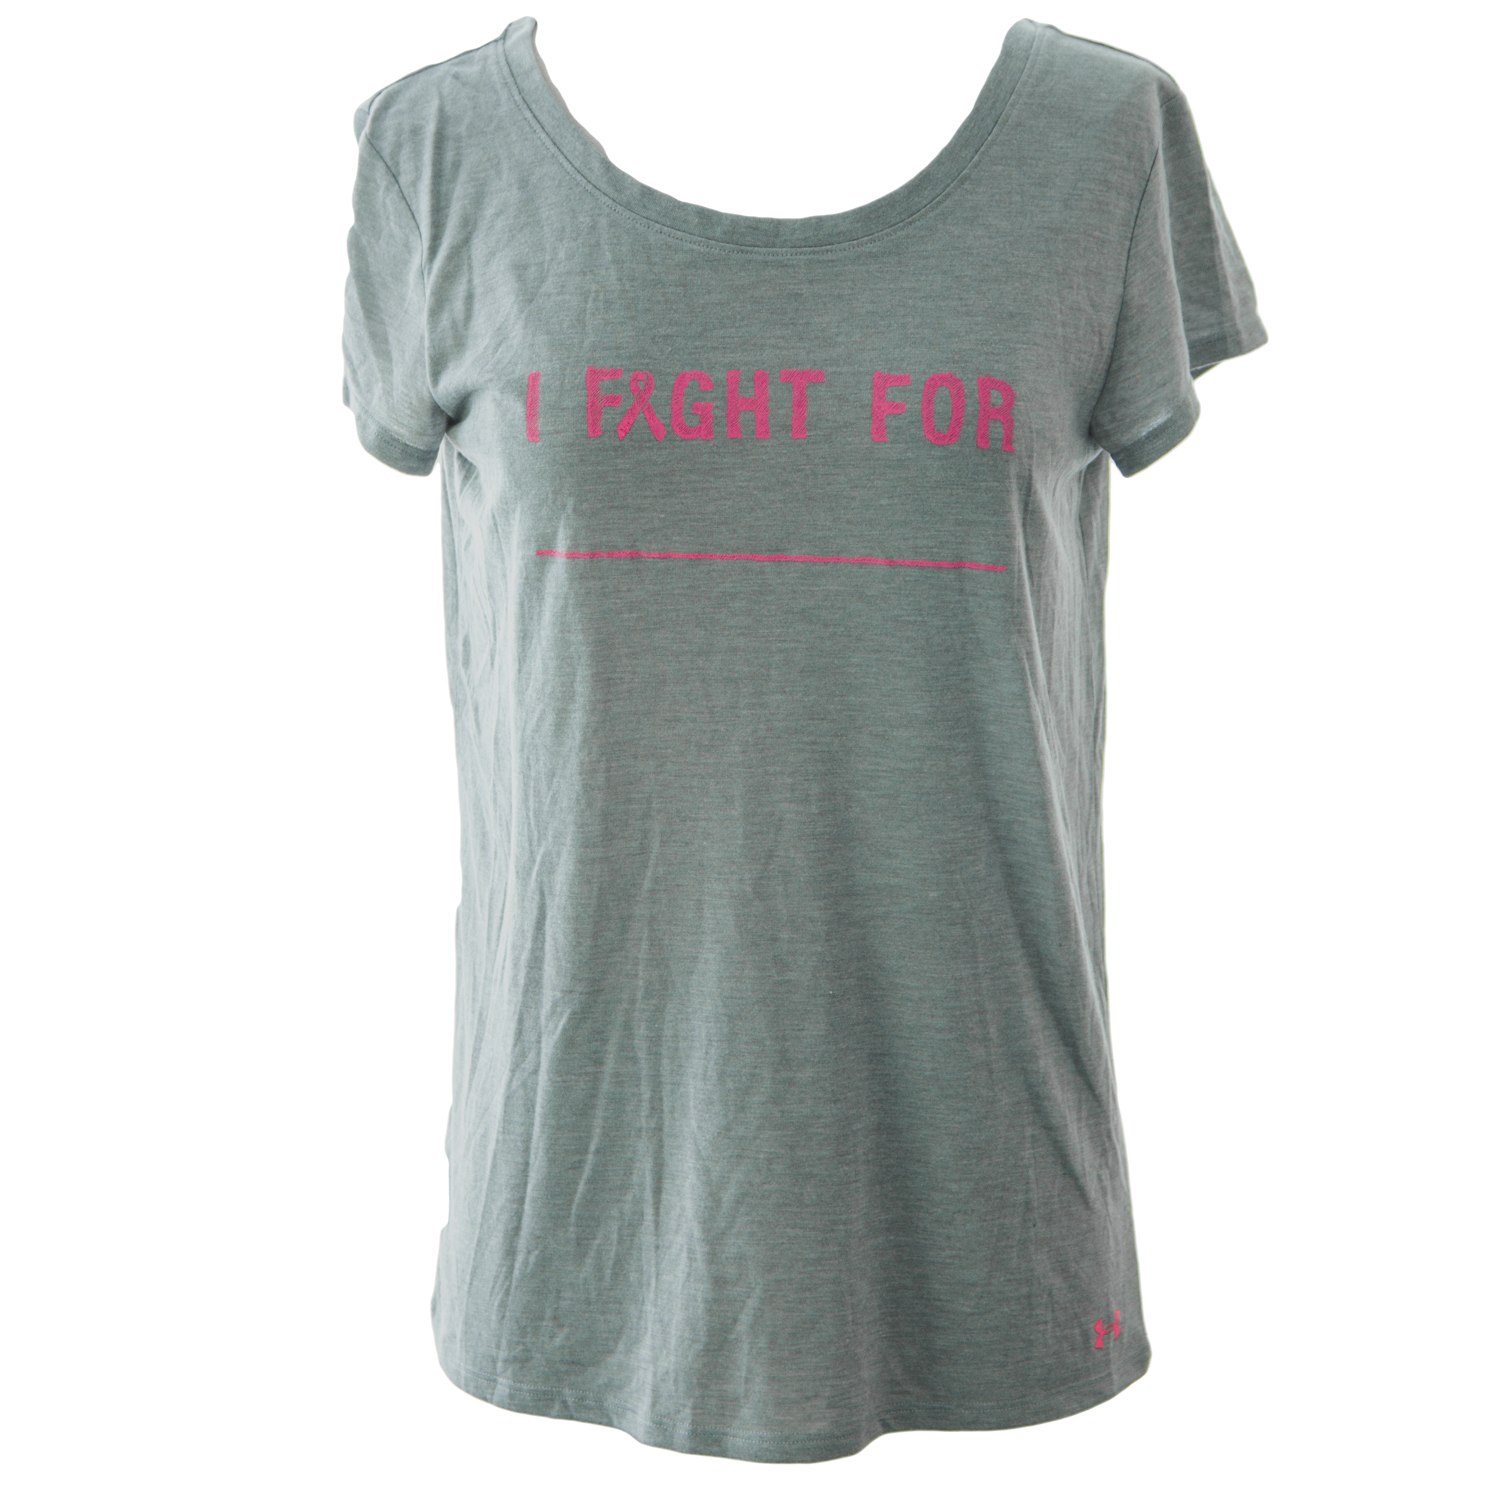 Under Armour Women's Power in Pink "I Fight For" T-Shirt Small Heather Grey - image 1 of 2